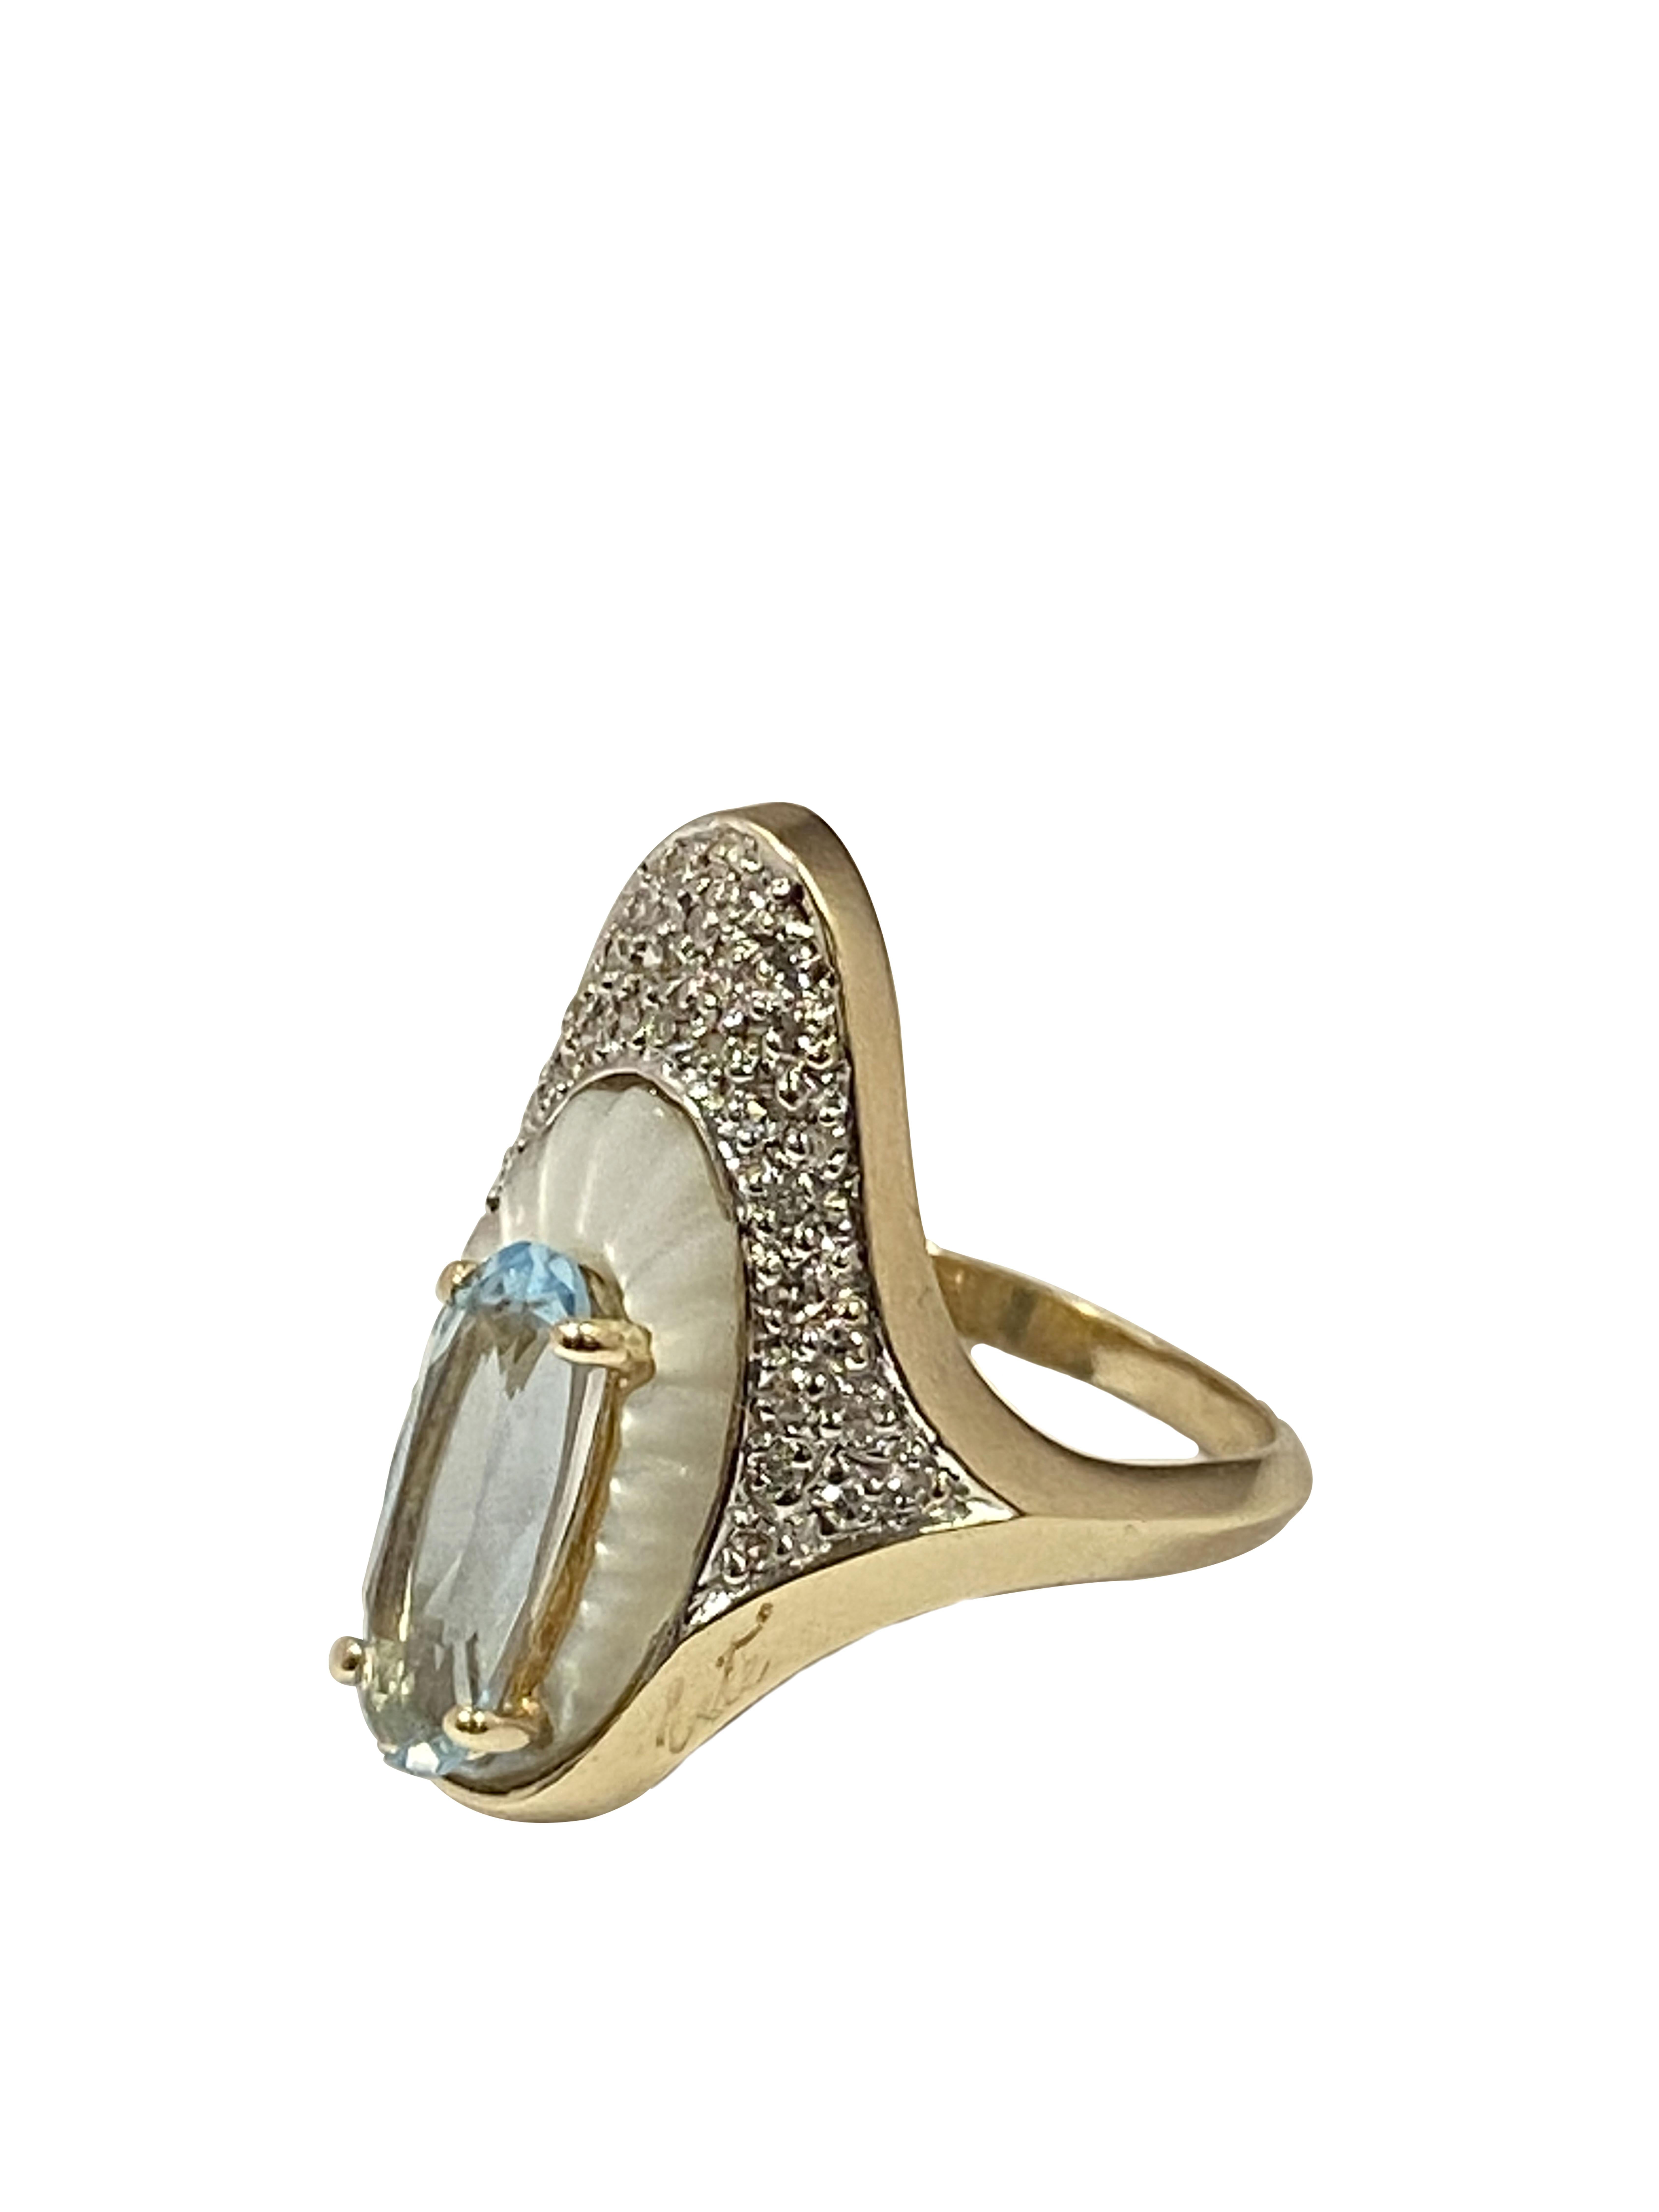 Circa 1990 Erte Alouette 14k Yellow Gold Ring in the famous Erte Art Deco style the ring measures 1 inch in length X 5/8 inch wide, centrally set with an oval Blue Topaz set on top of a carved Mother of Pearl and further surrounded by Round